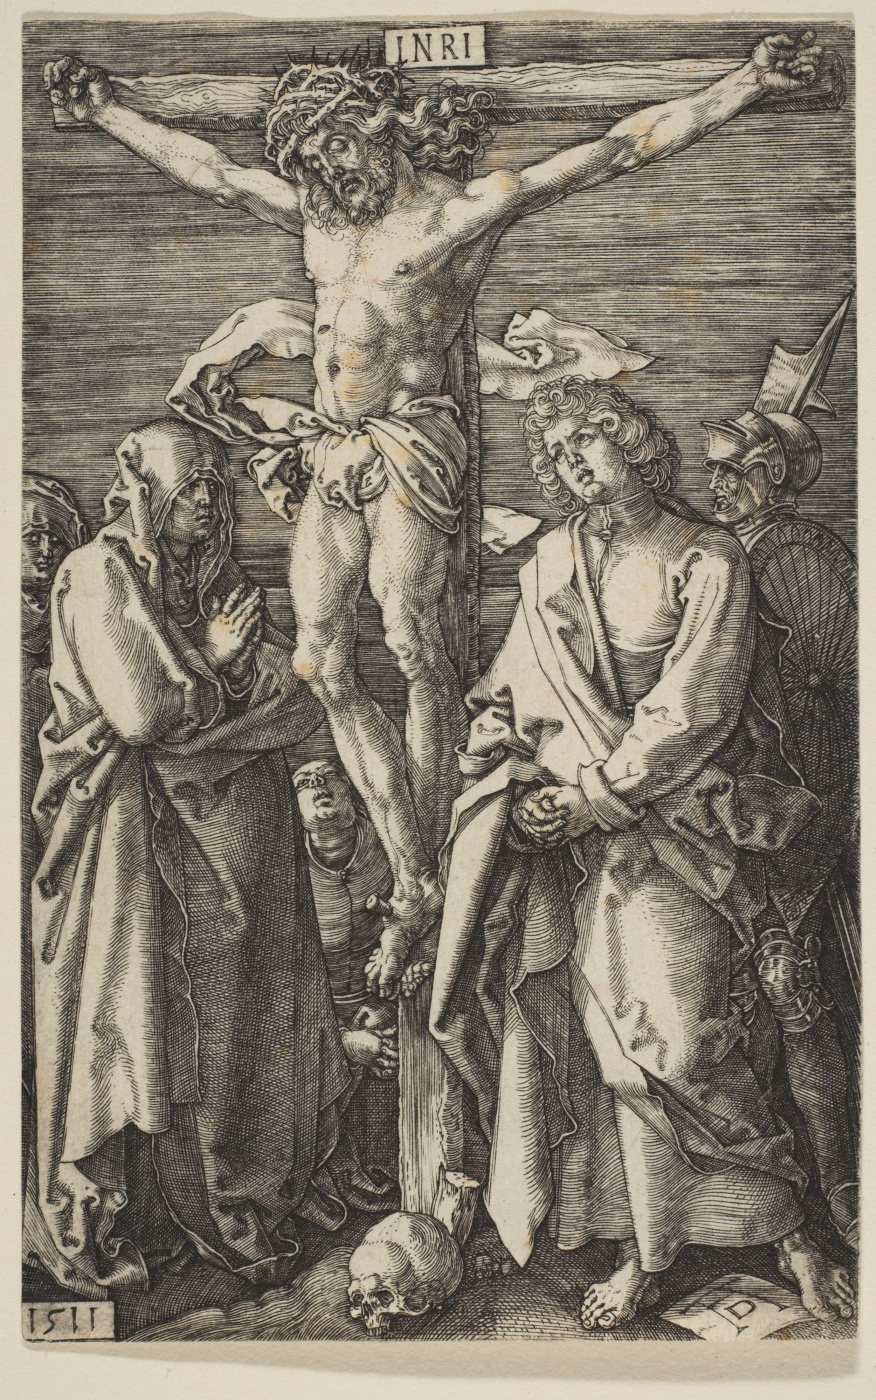 Albrecht Dürer. The crucifixion. From the cycle "the passion of the Christ"